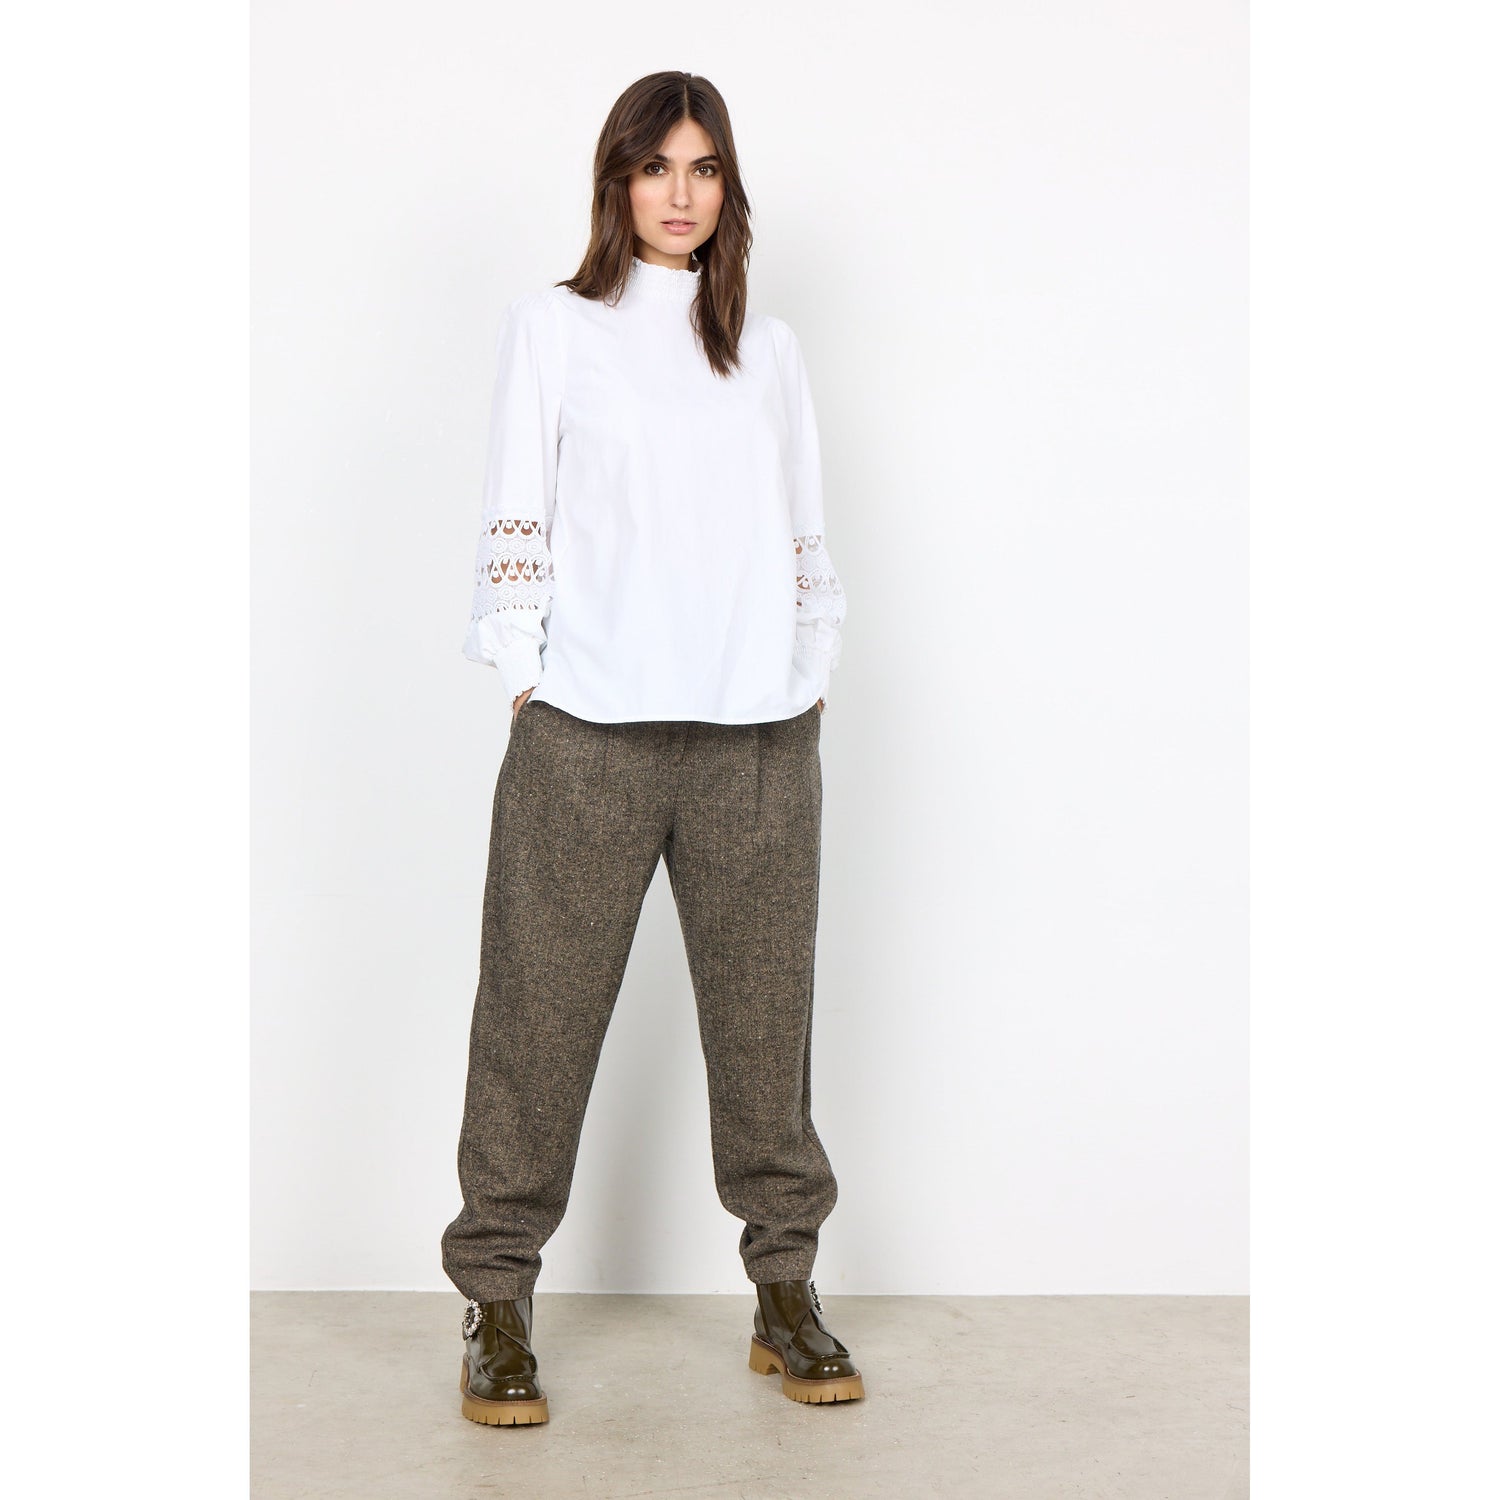 Tayler 3-C Trousers